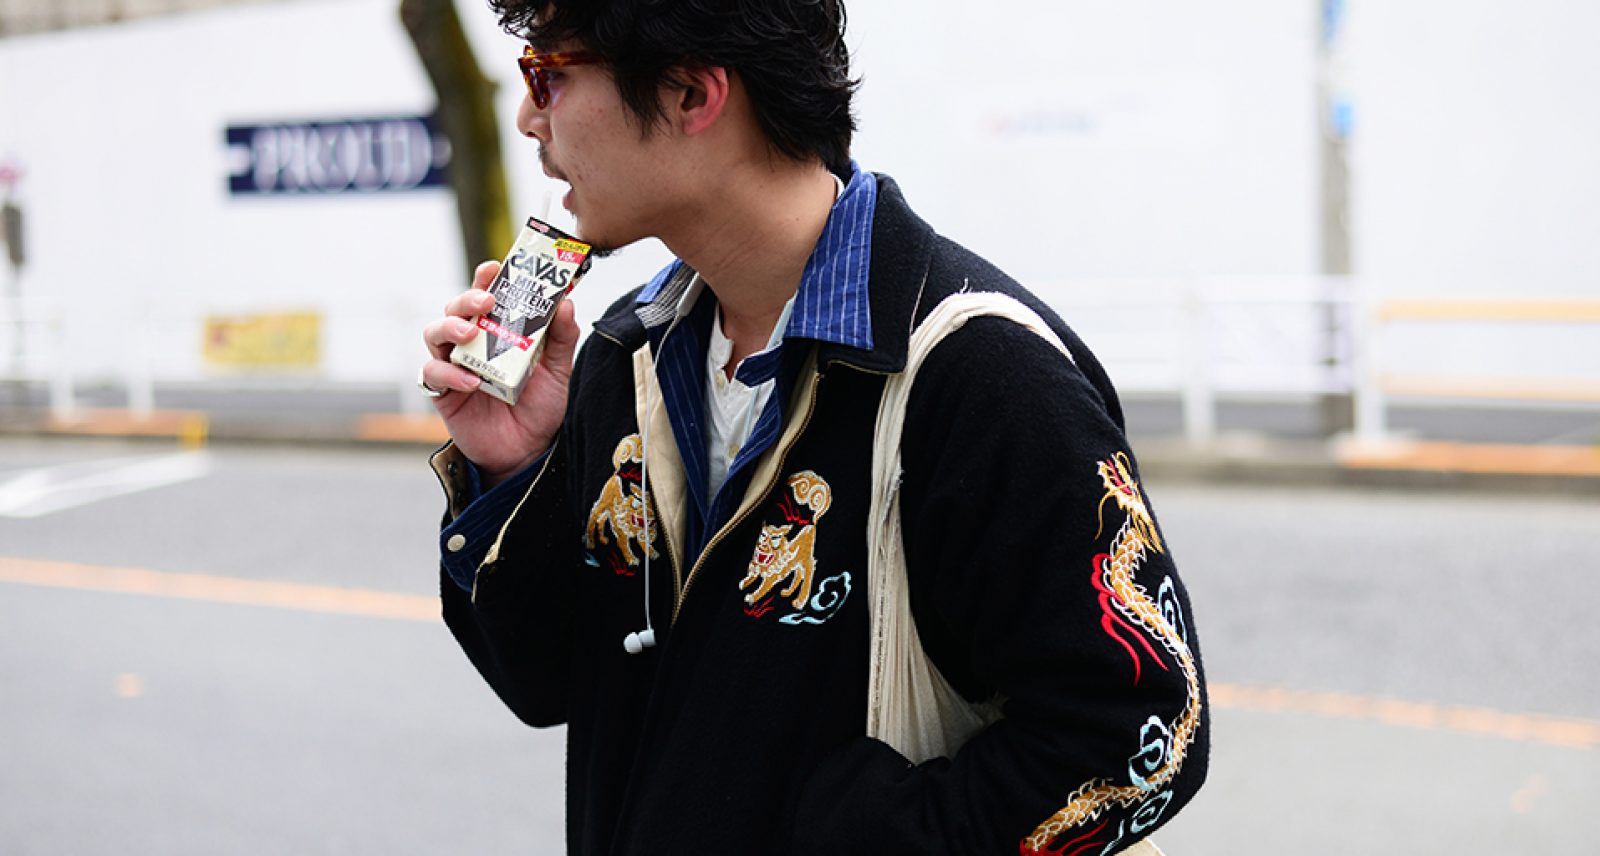 These 15 Street Style Looks from Tokyo Are a Master Class in the Low-Key Flex